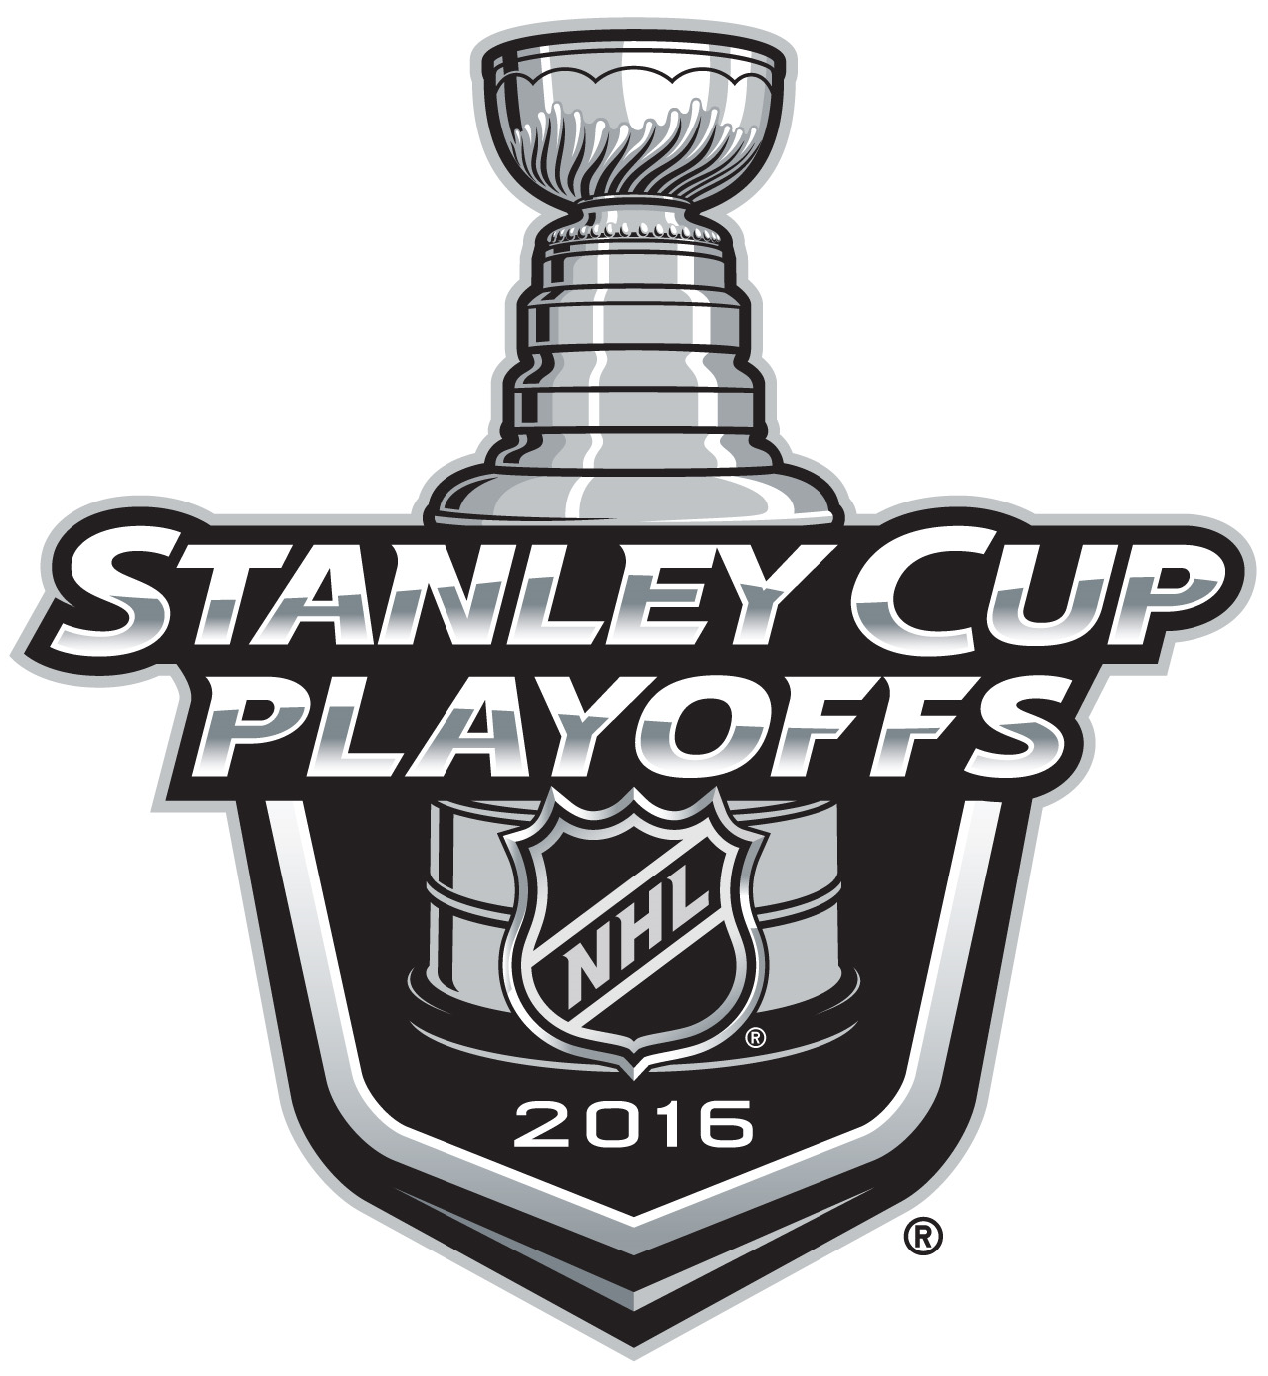 Stanley Cup Playoffs 2016 Primary Logo iron on transfers for T-shirts